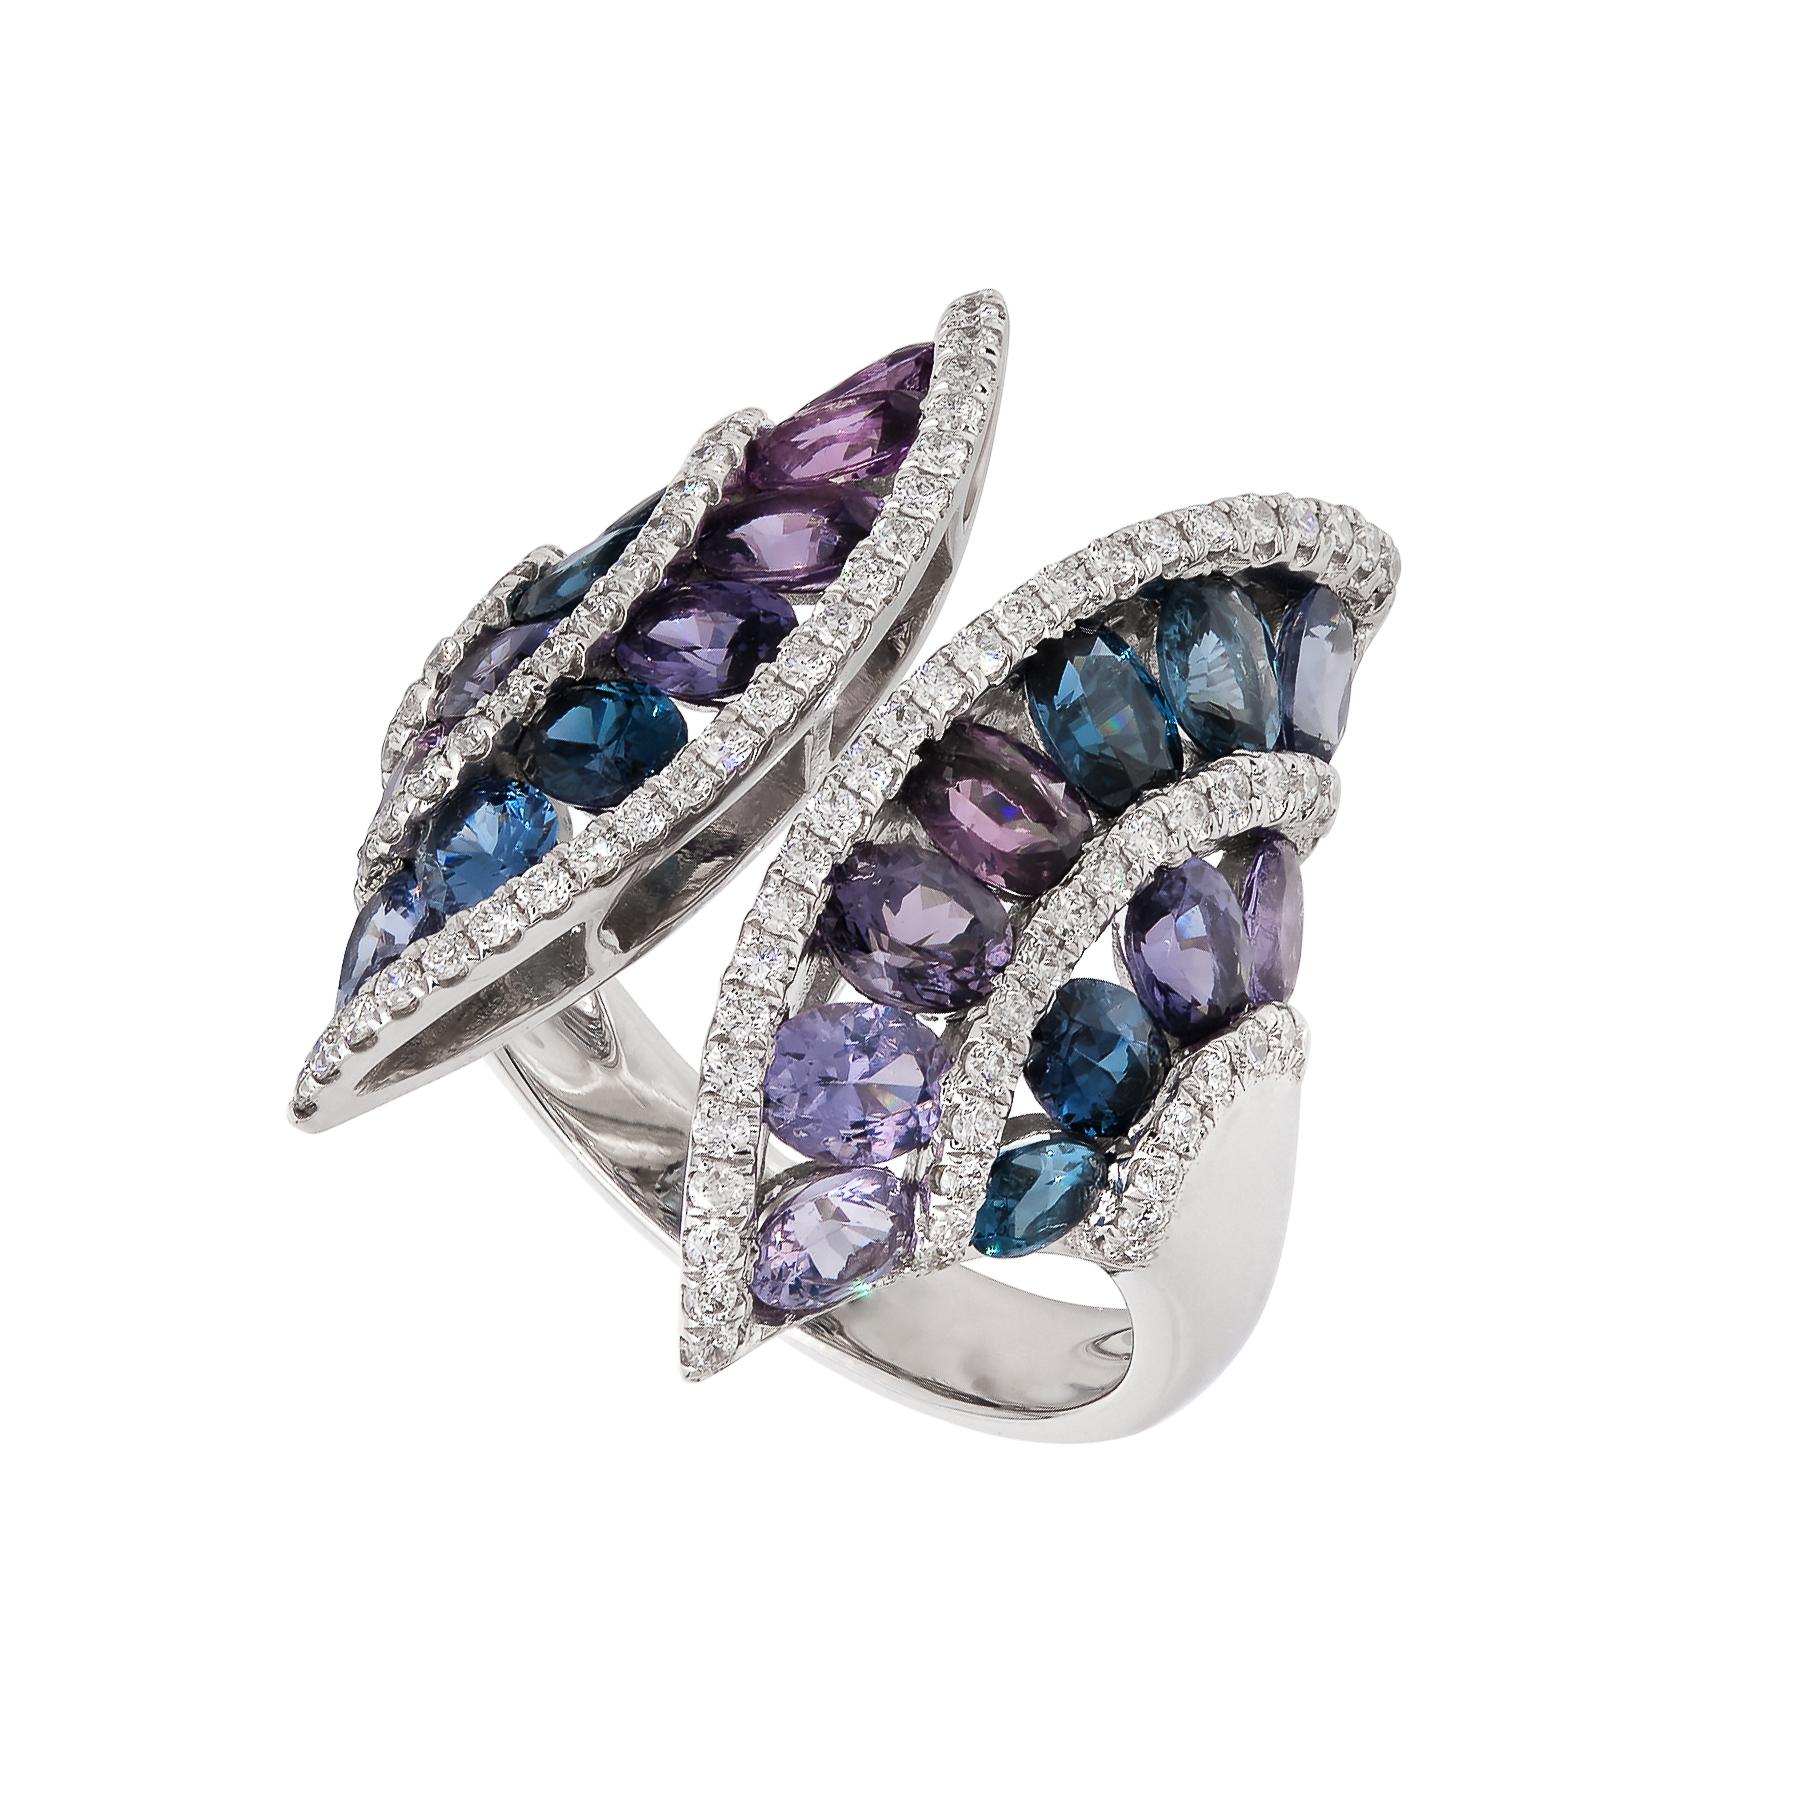 18K White Gold
Multi color Sapphires: 3.65 cts
Diamond: 0.50 cts
All diamonds are G-H/SI stones.